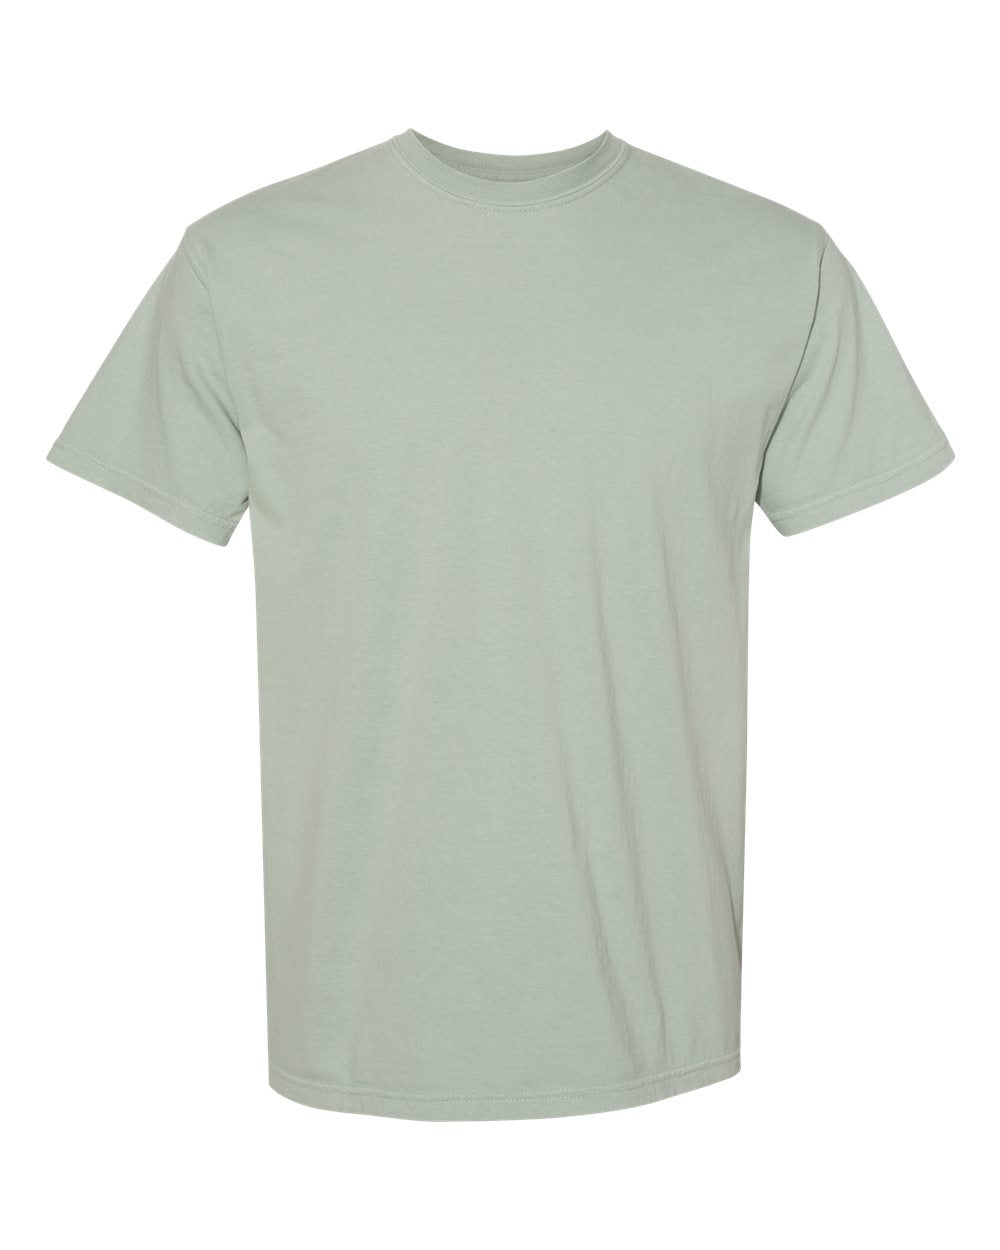 Comfort Colors Tee (No Pocket) - Kite and Crest